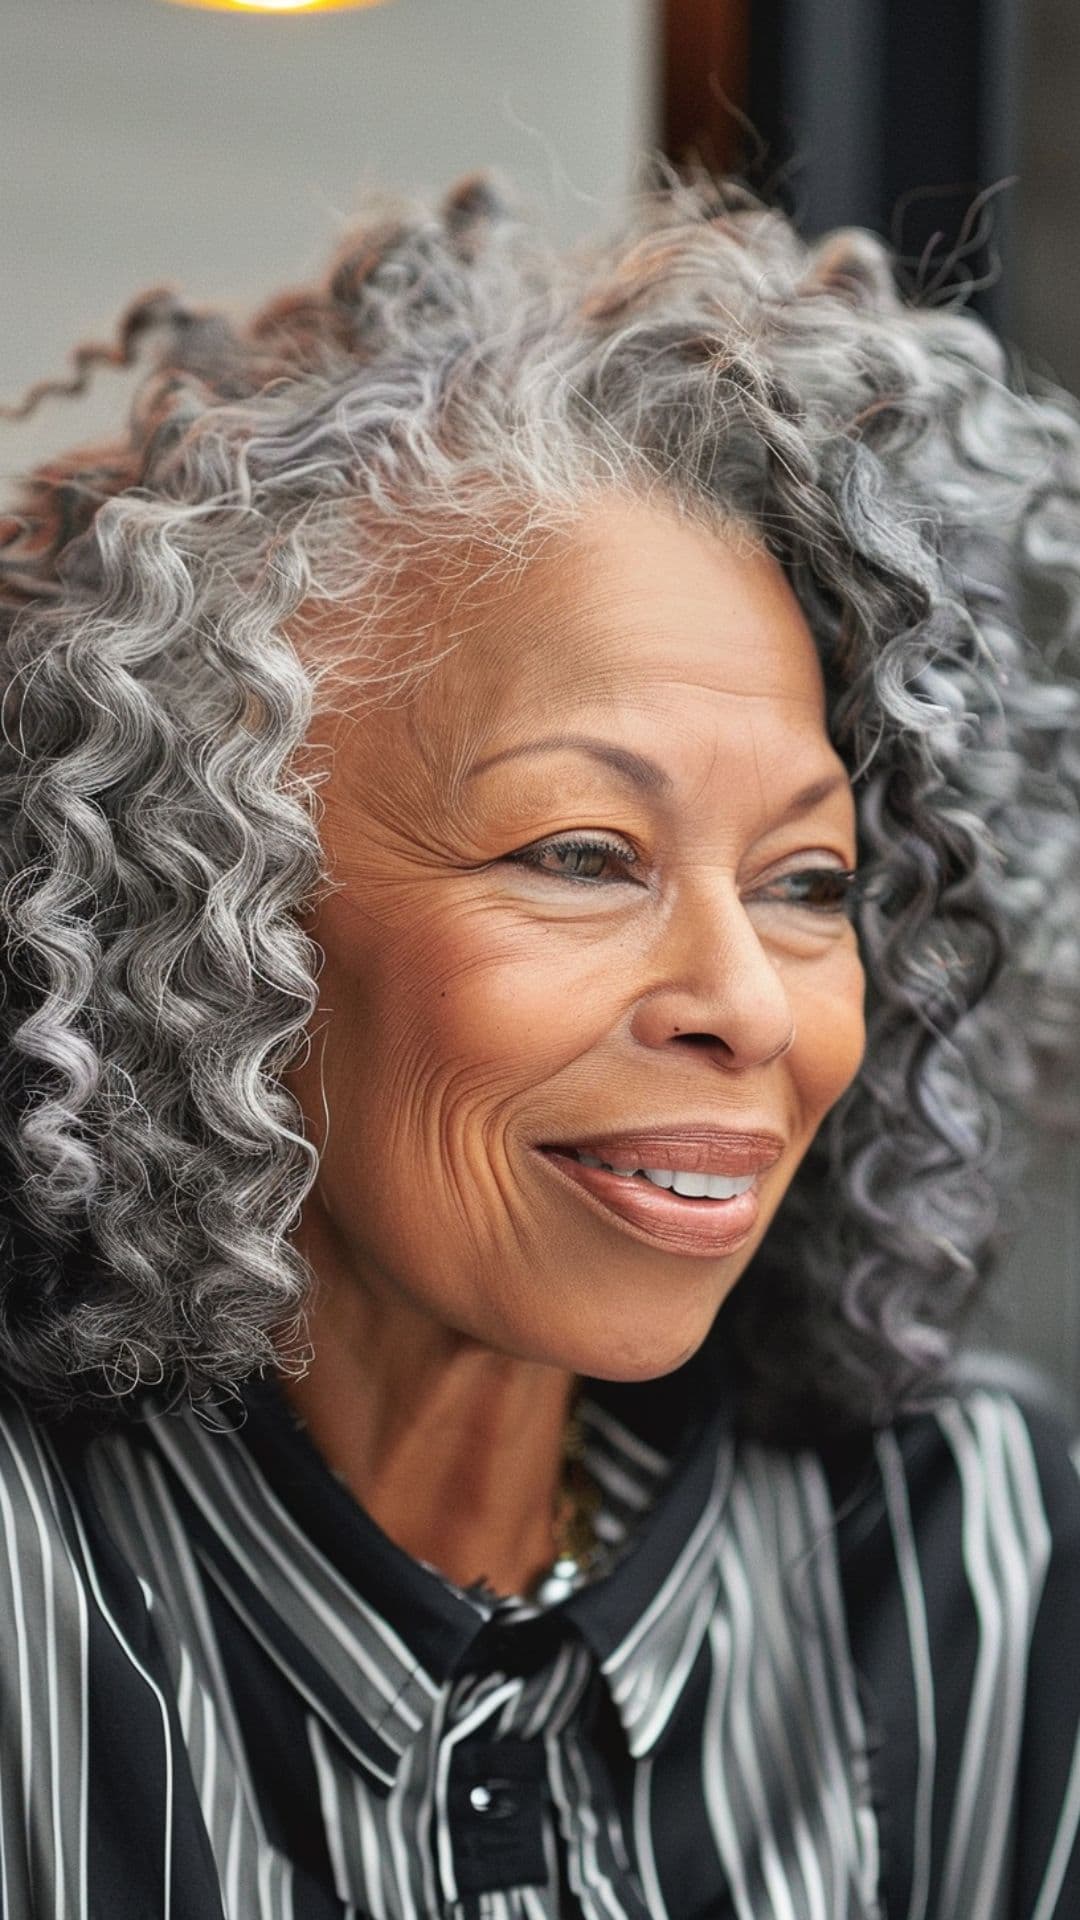 An older black woman modelling a salt and pepper afro hairstyle.